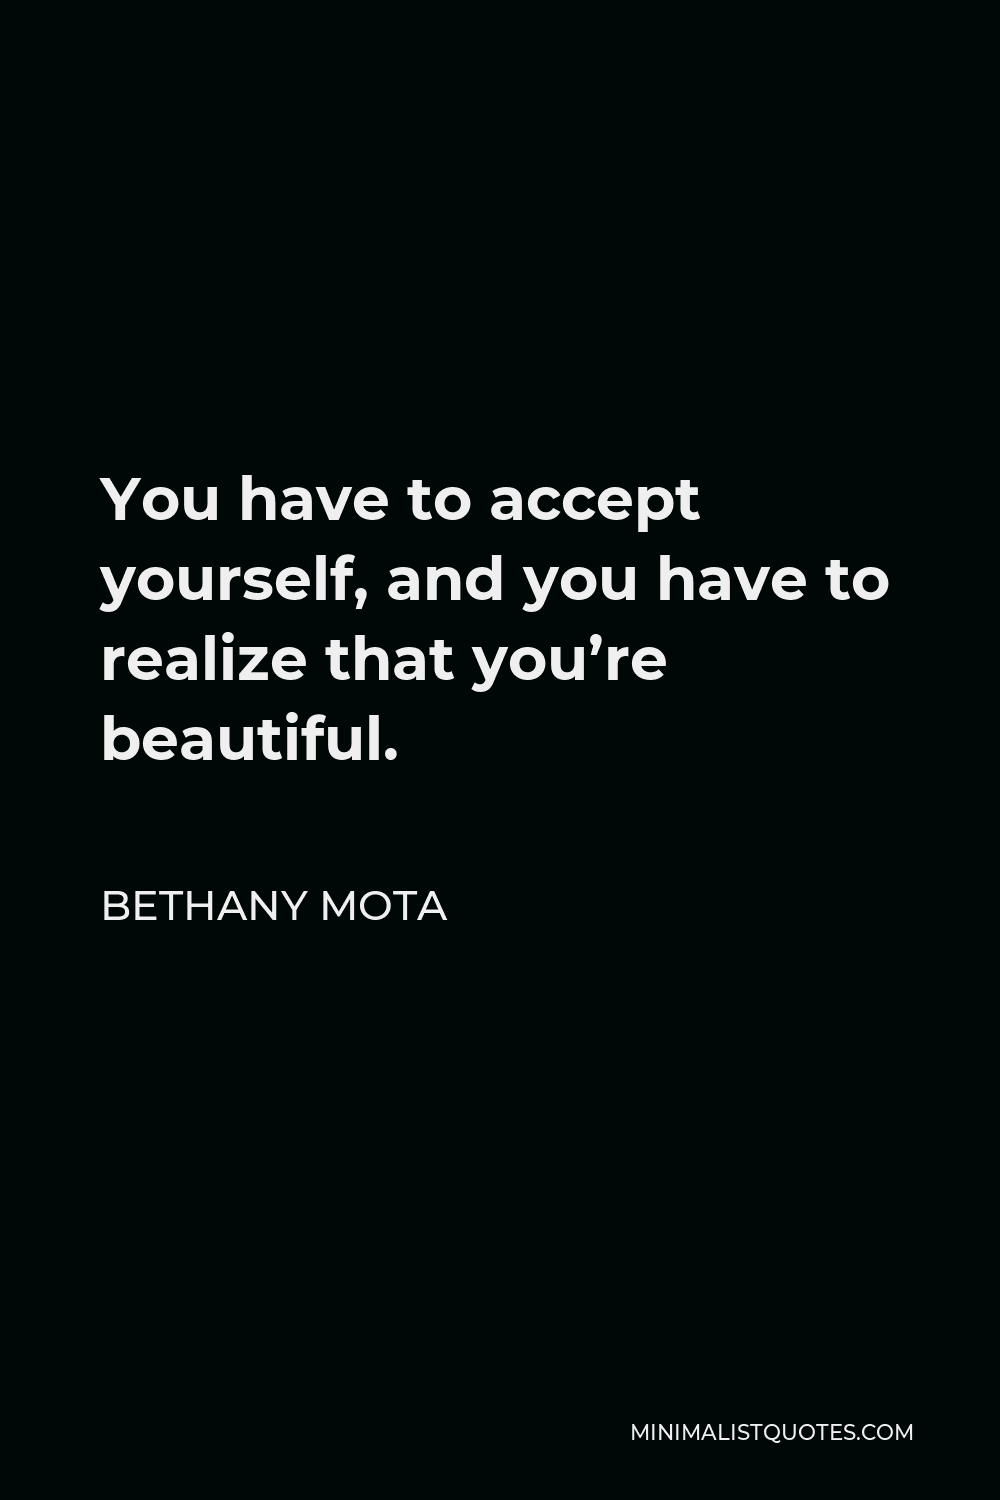 Bethany Mota Quote - You have to accept yourself, and you have to realize that you’re beautiful.